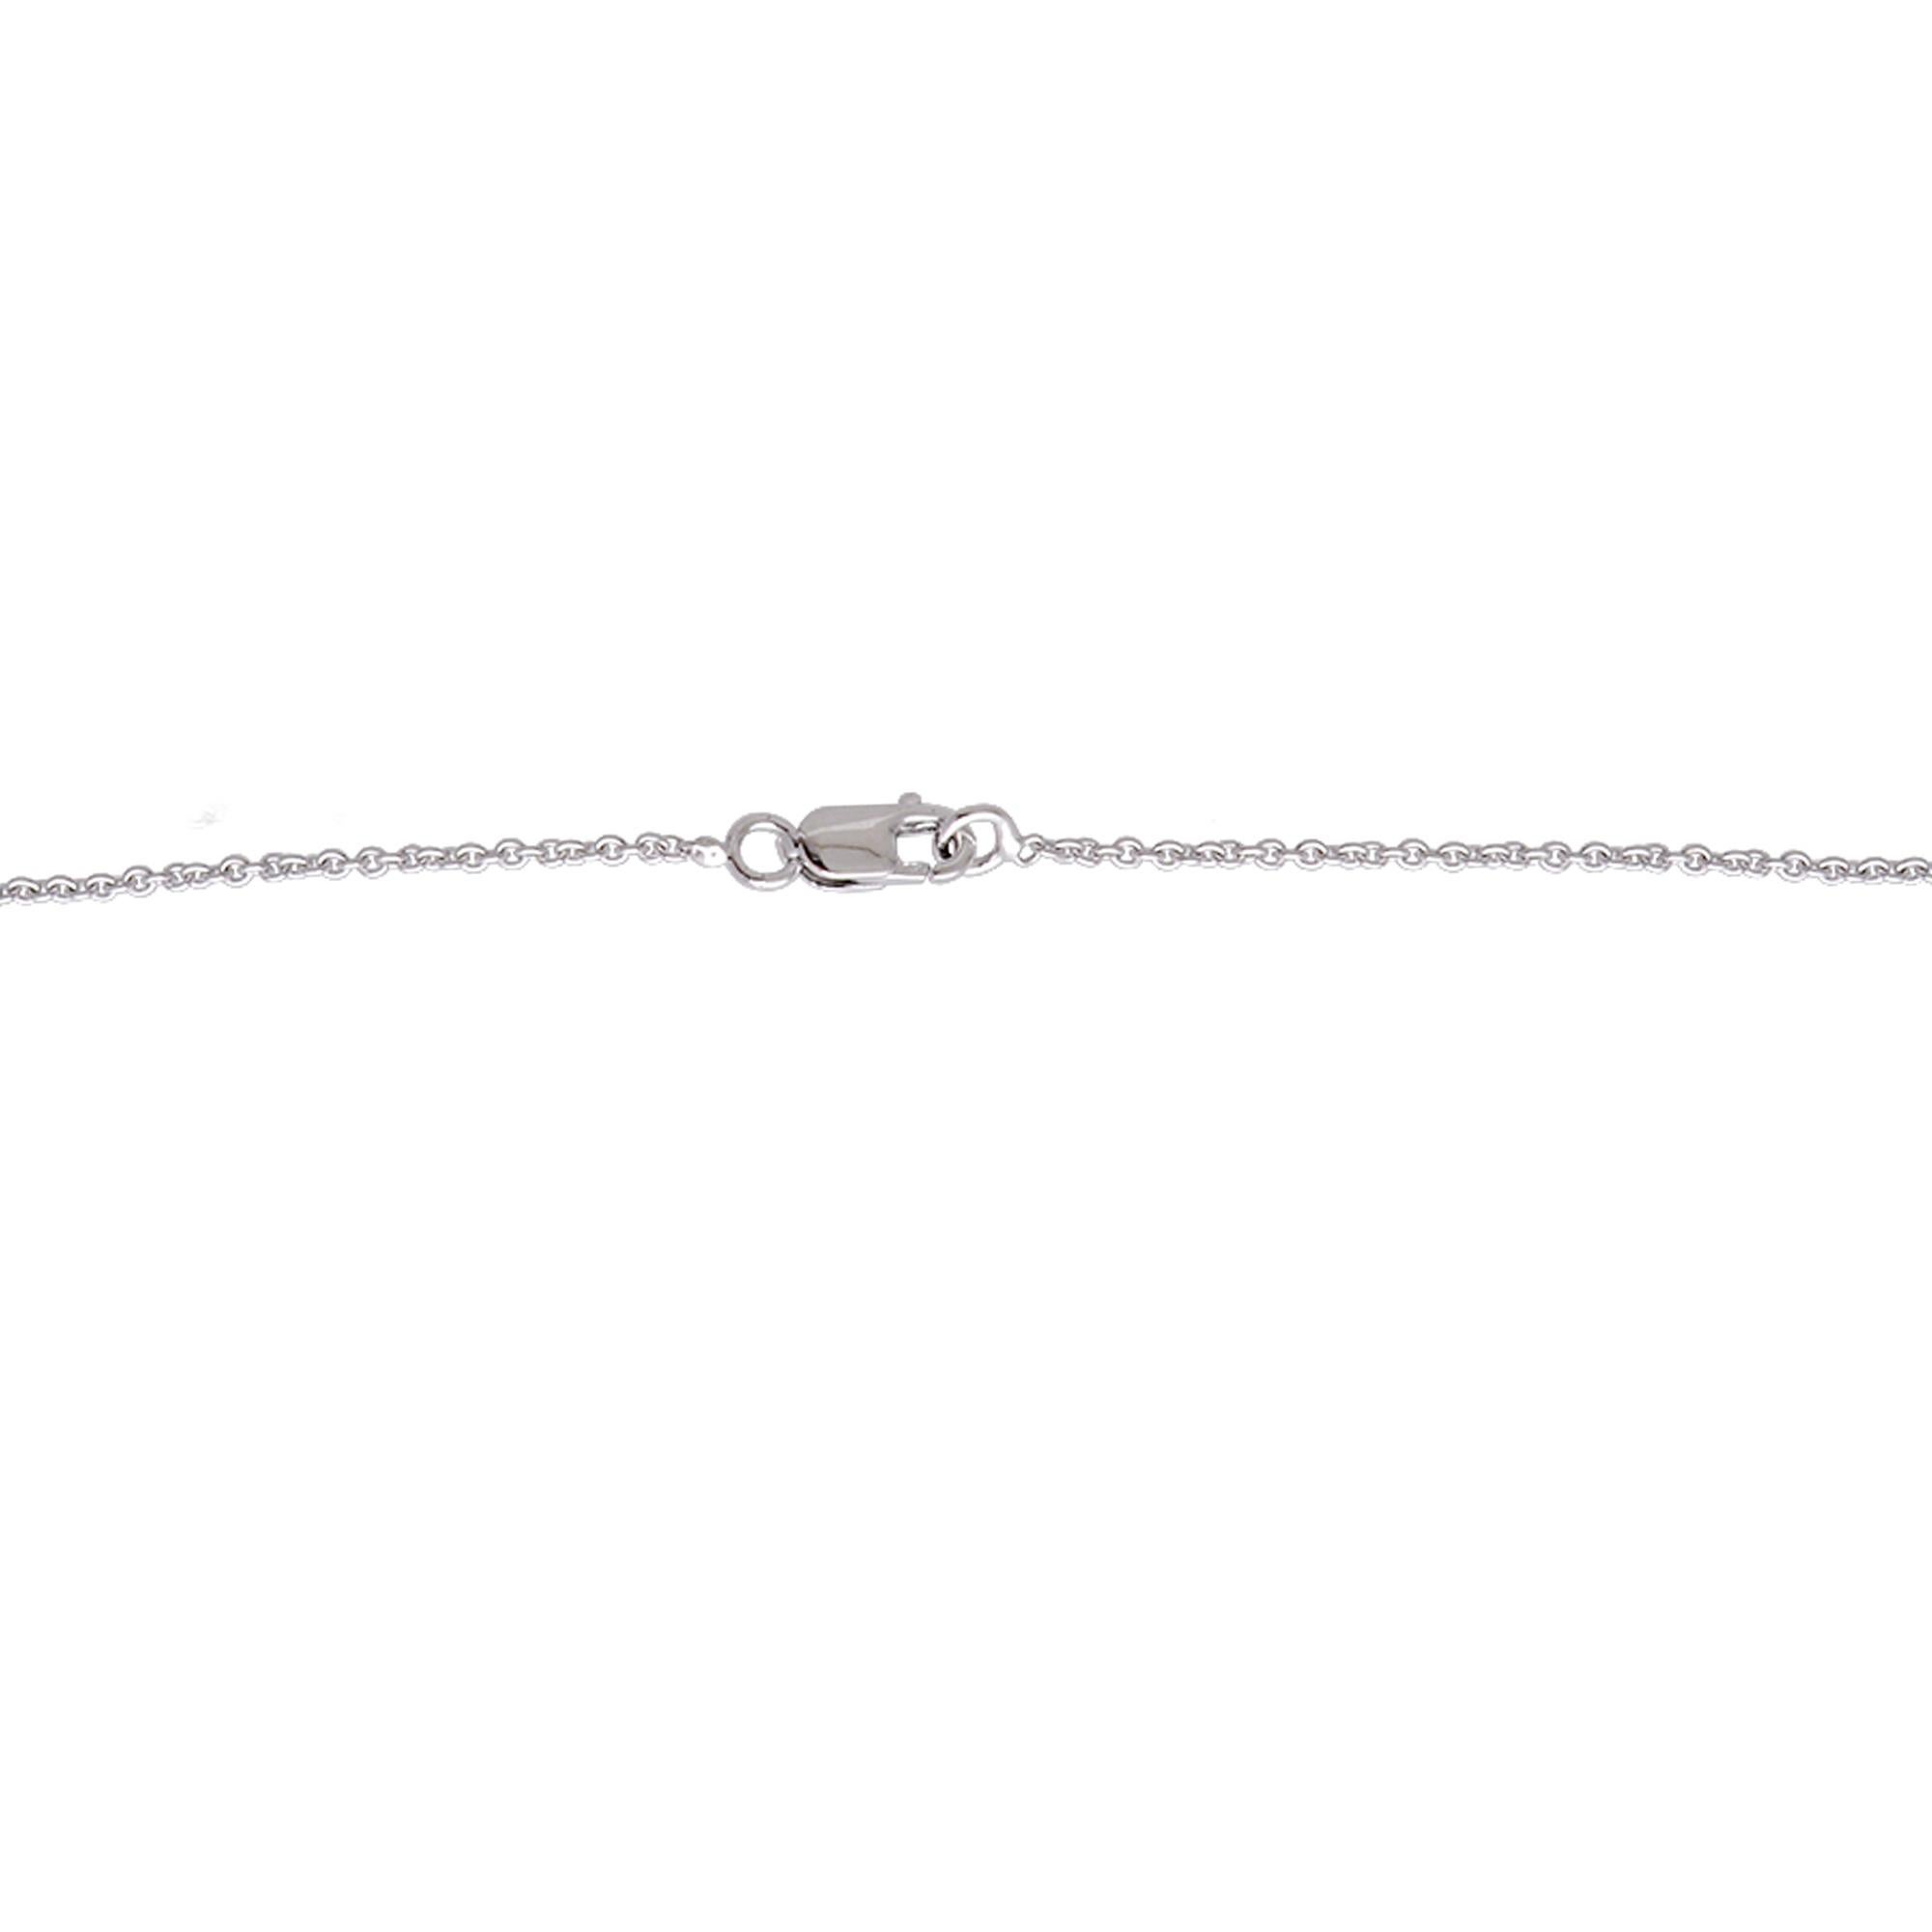 Women's 1.85 Carat Marquise Diamond Choker Necklace Solid 18k White Gold Fine Jewelry For Sale